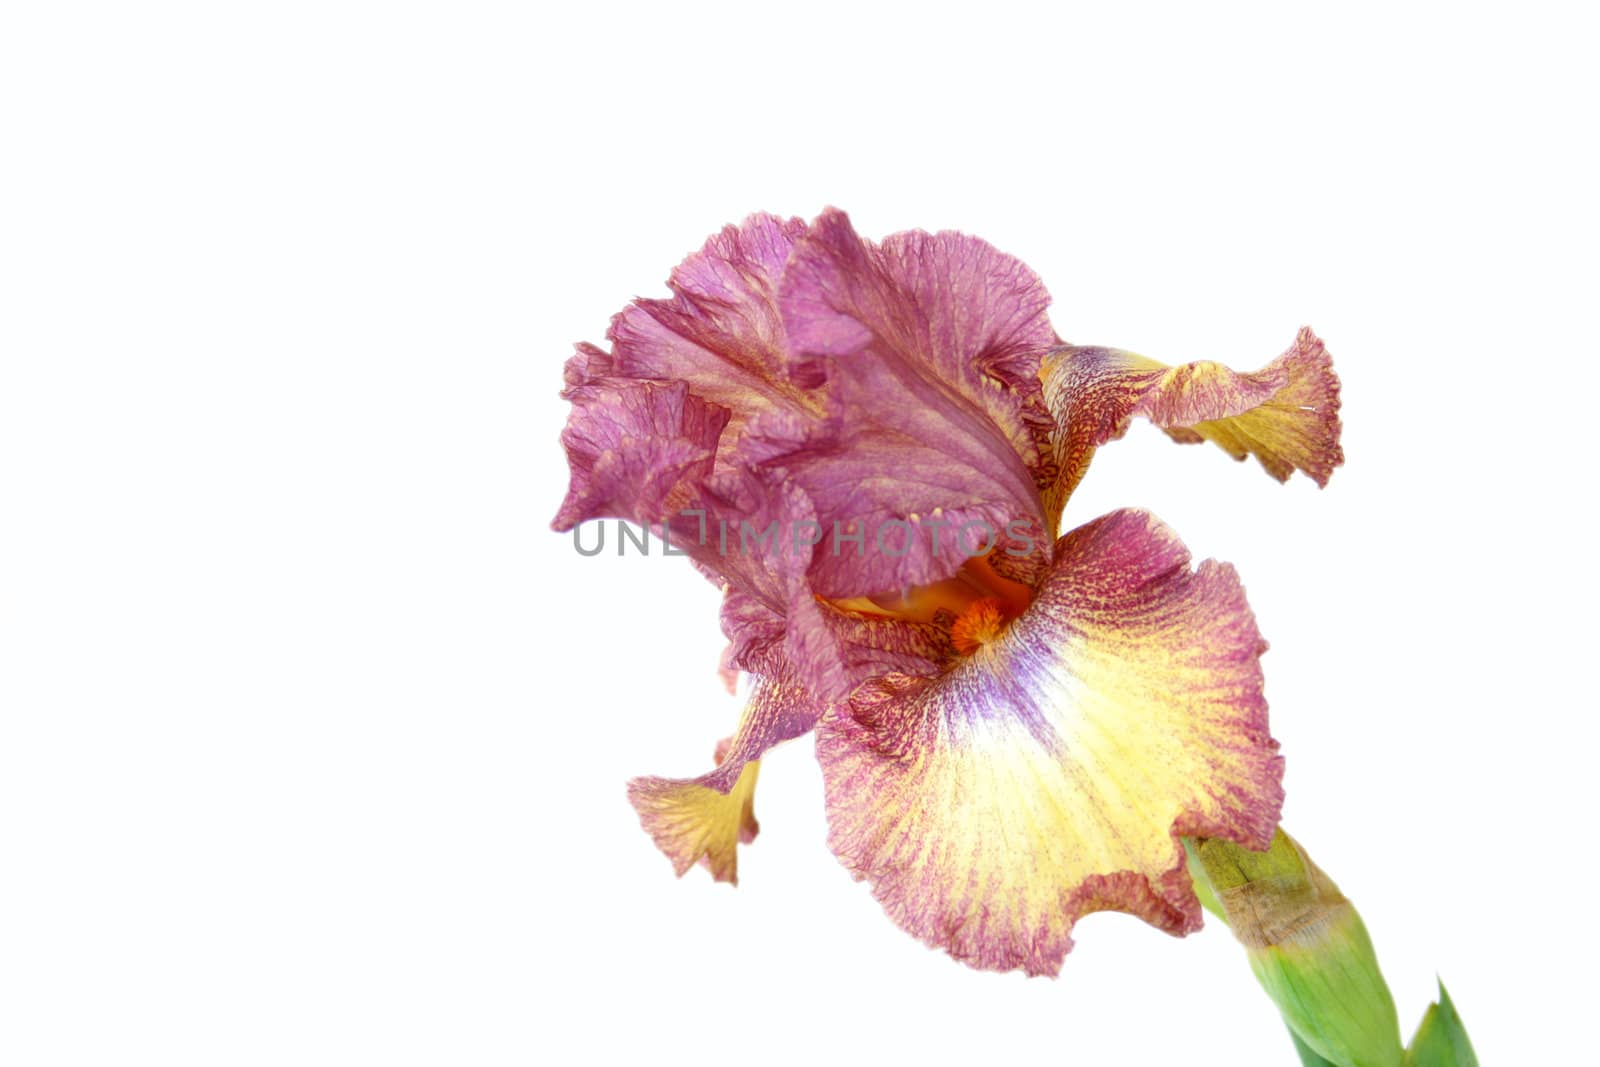 An Iris bloom isolated on a white background.